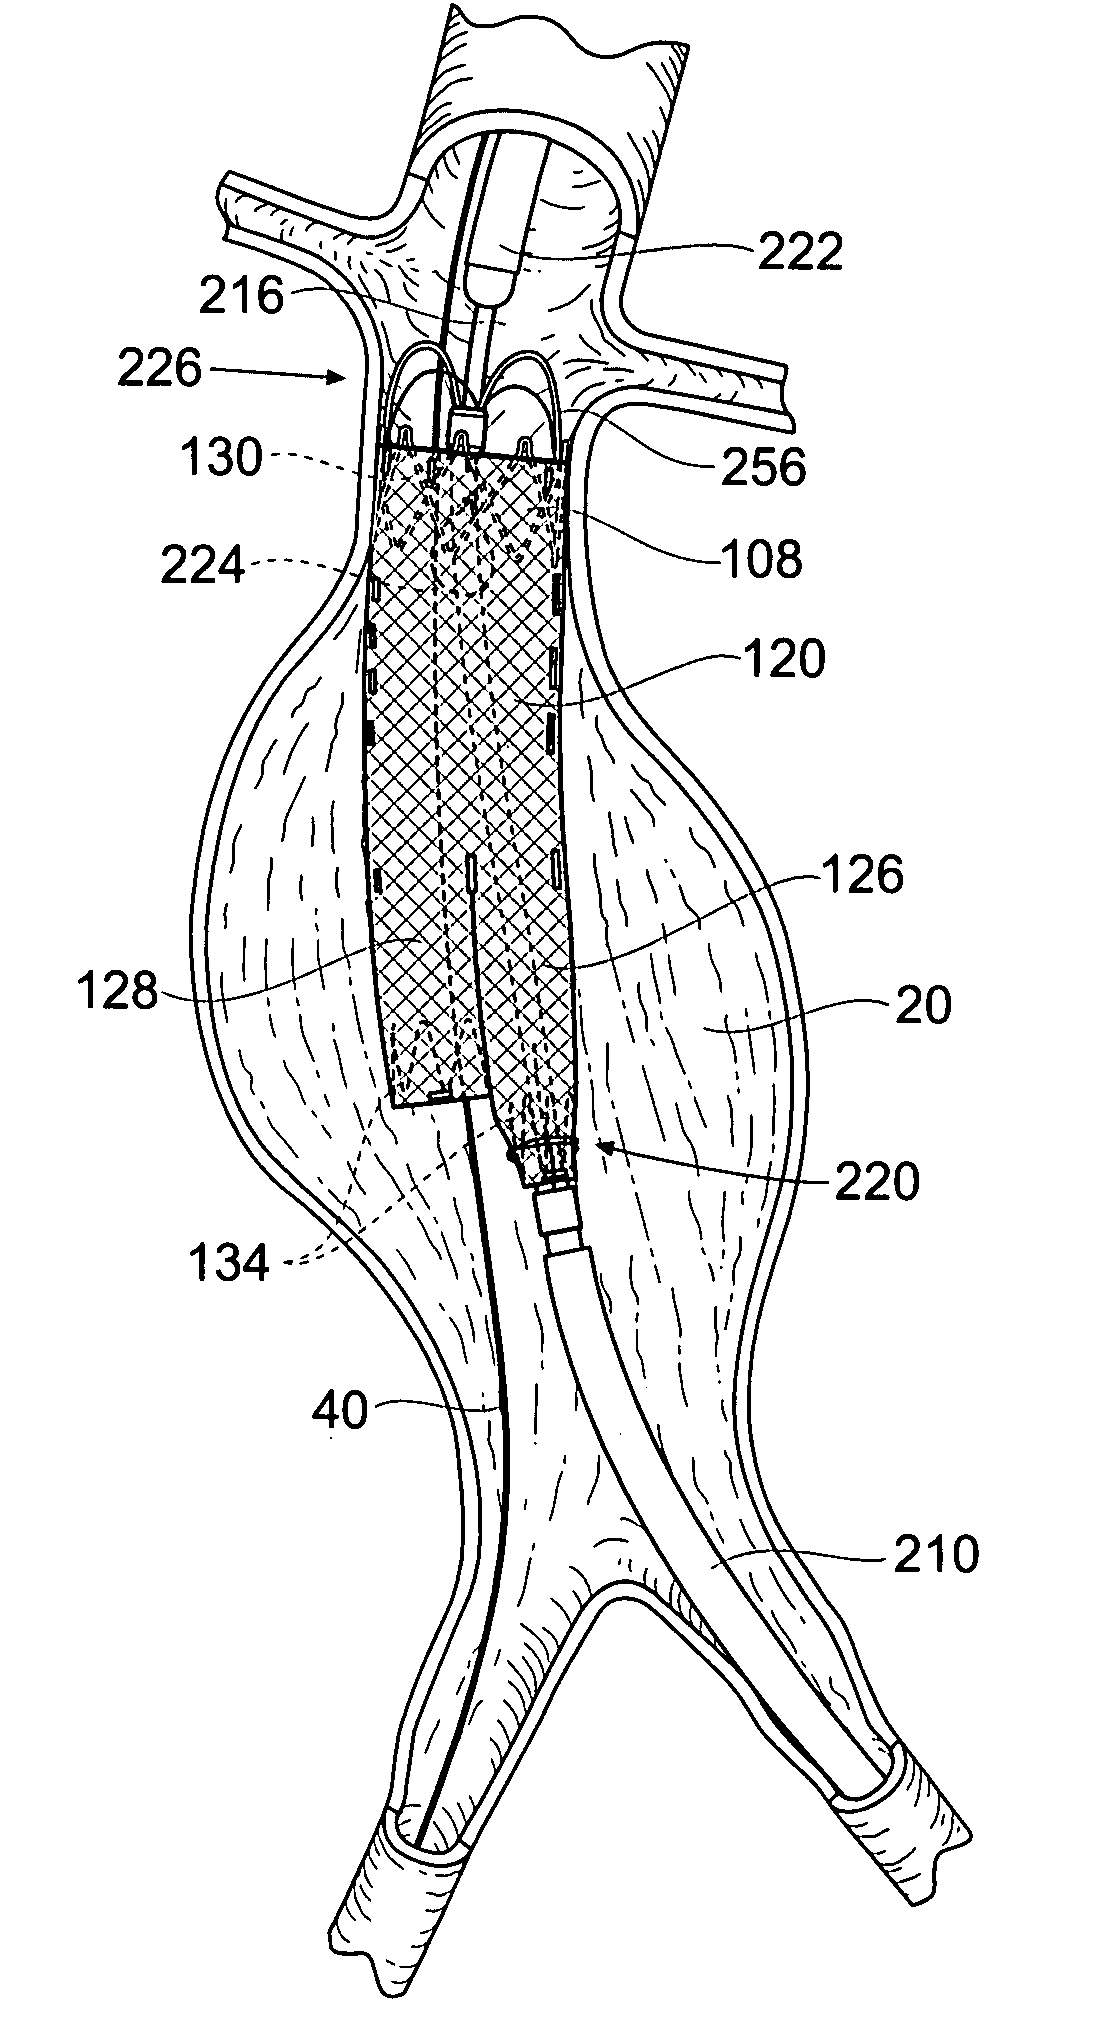 Devices, systems, and methods for prosthesis delivery and implantation